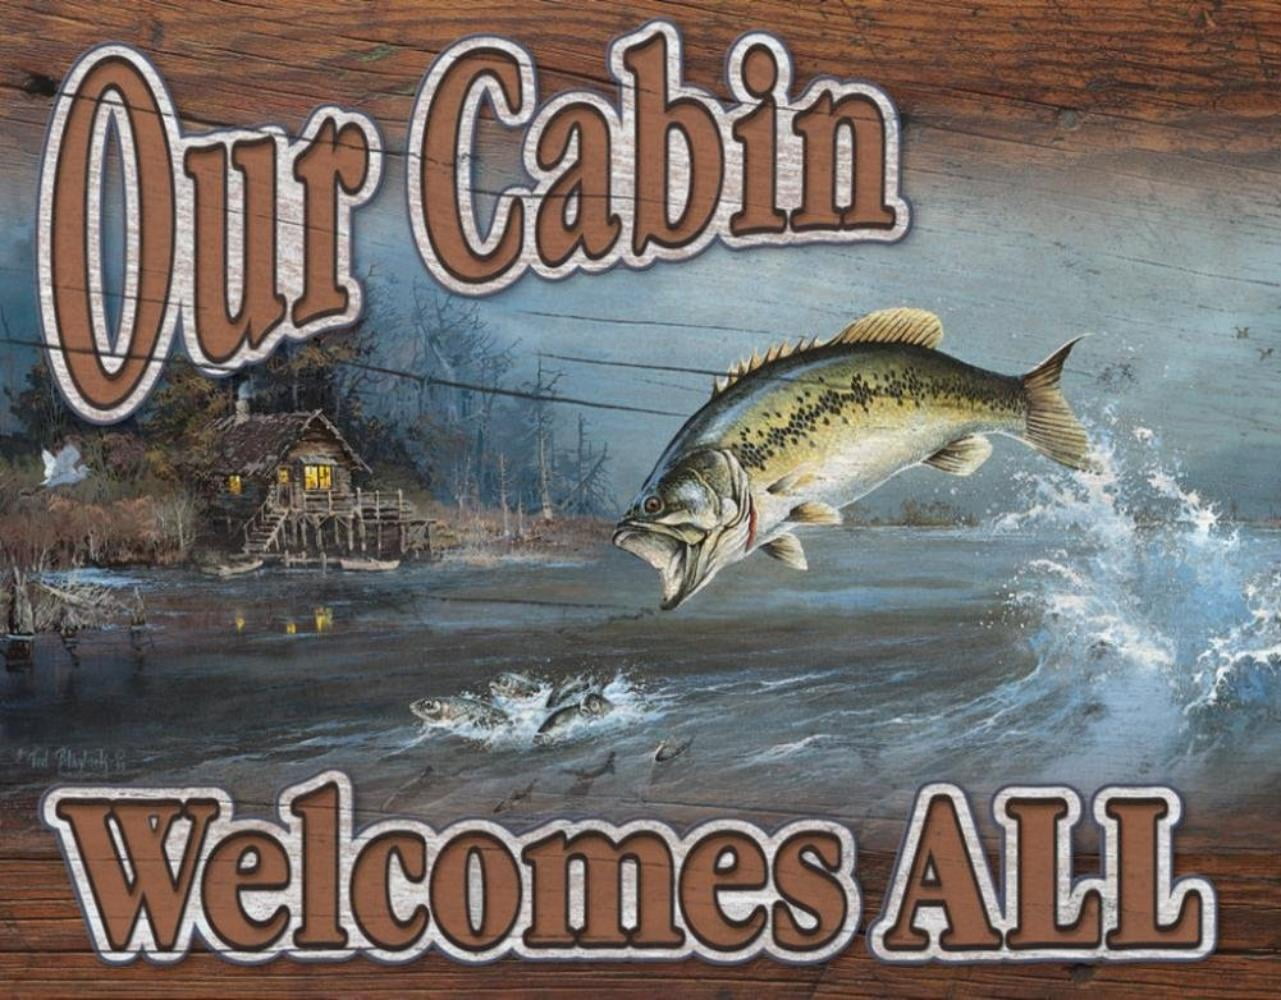 OUR CABIN WELCOMES ALL FISHING Tin Sign Wall Bar Garage Decor Classic Vintage 